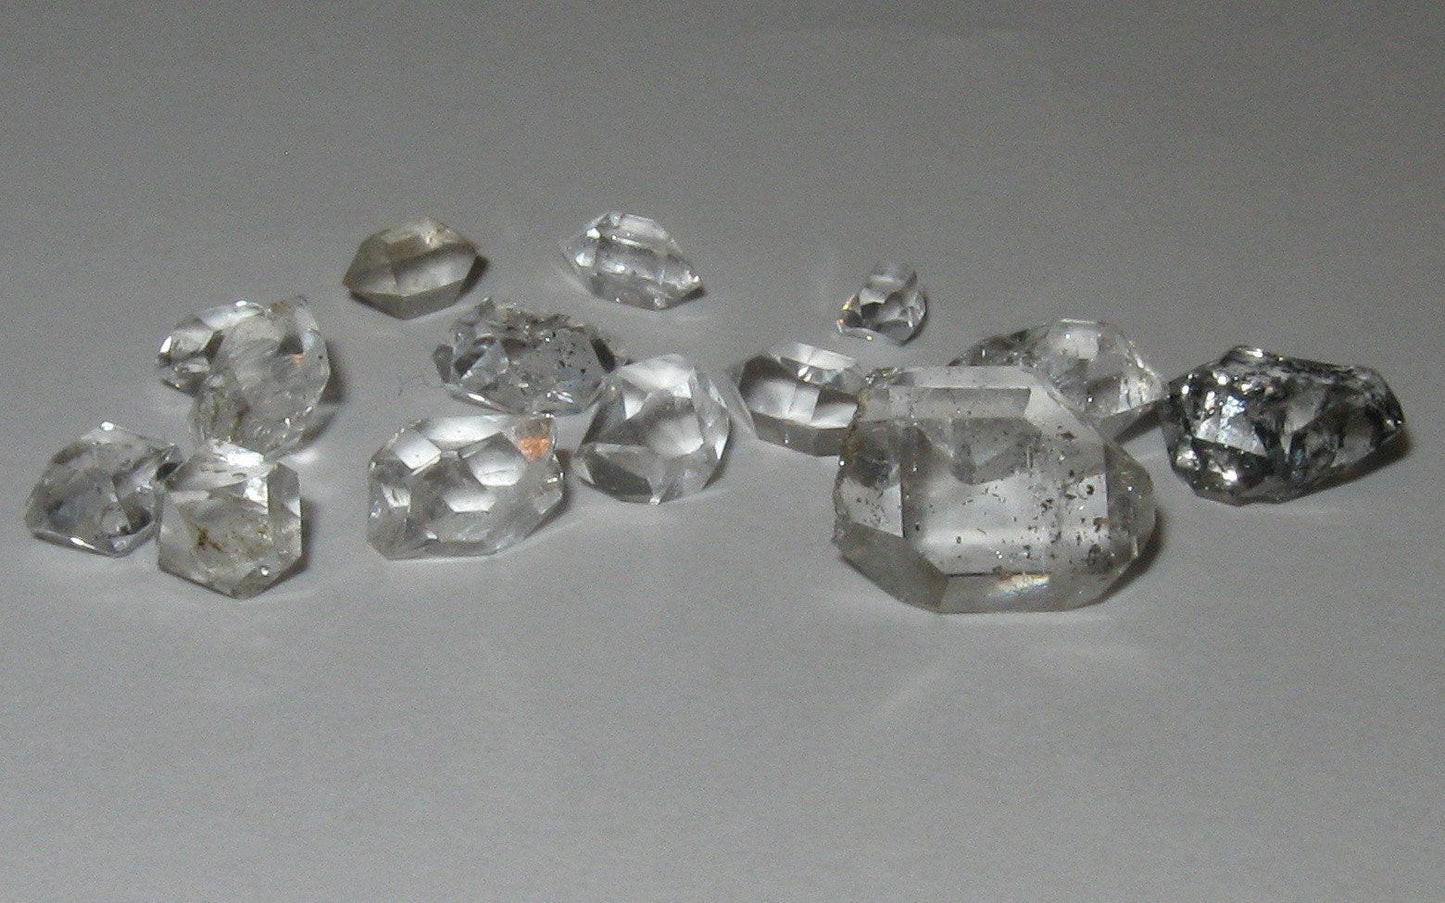 Herkimer Diamond Lot 1 - singles 7 grams | Of Coins & Crystals